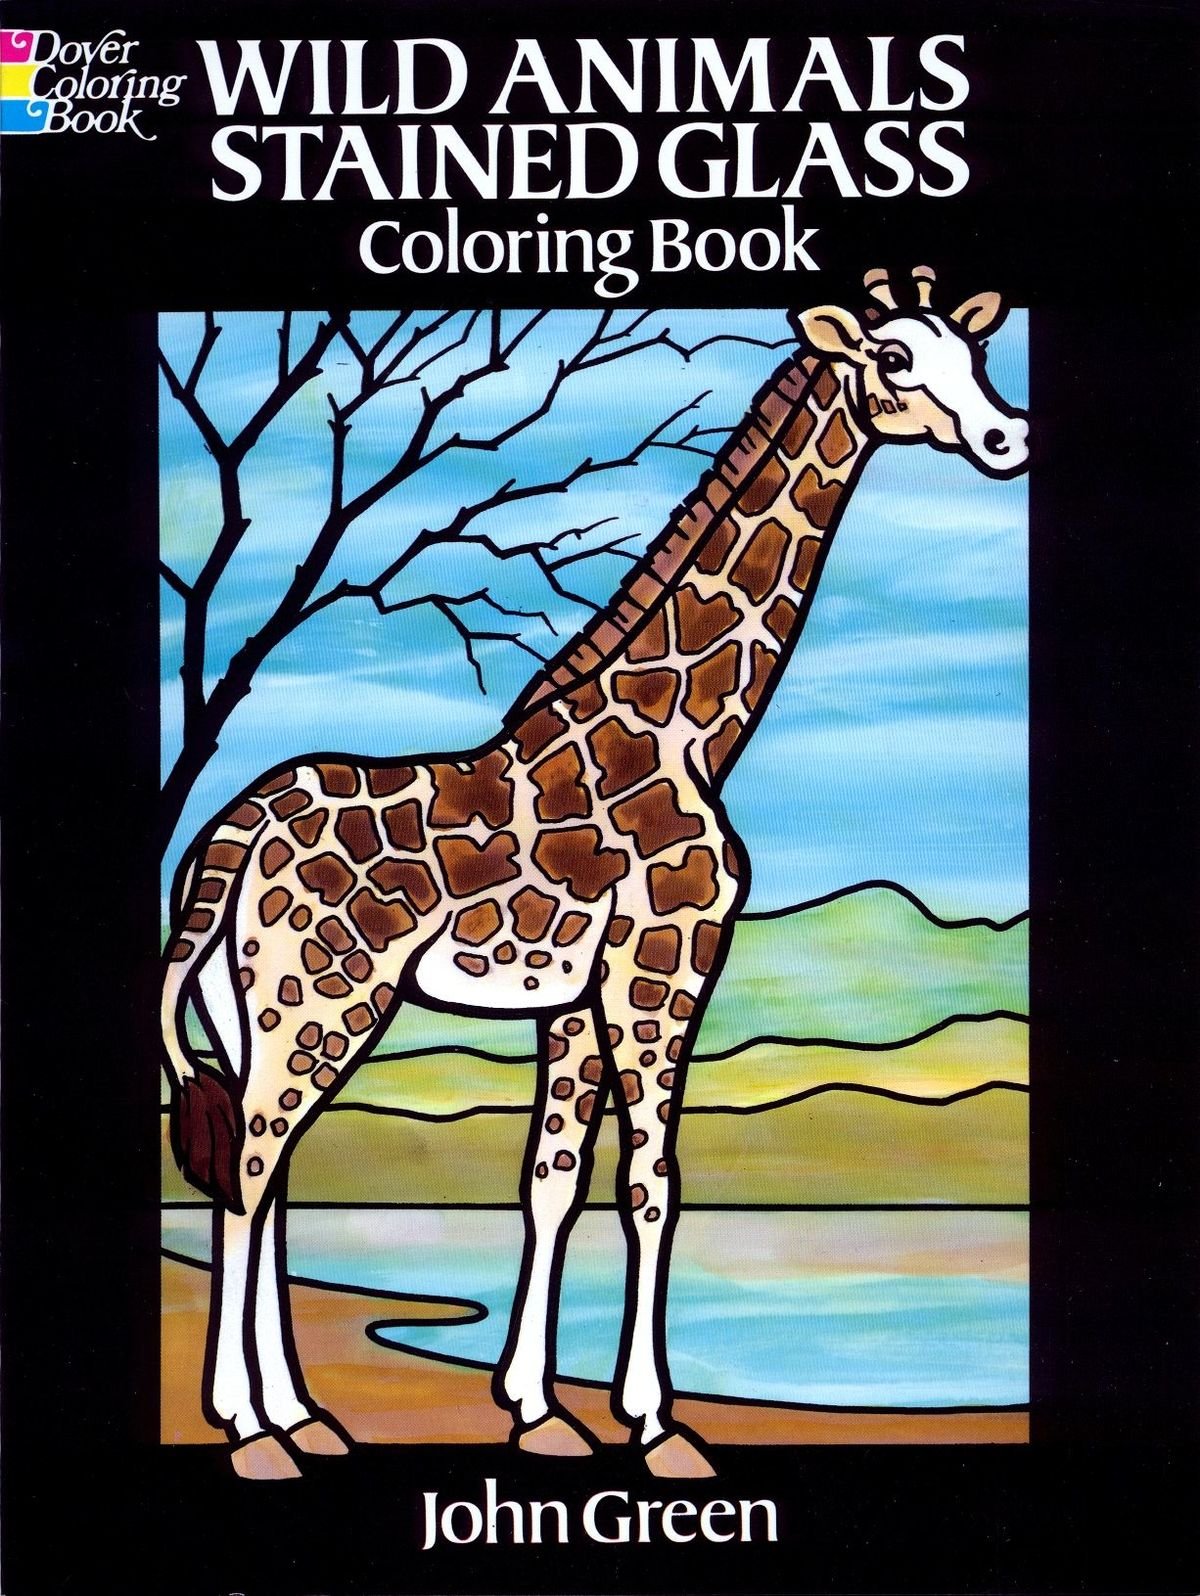 Dover - Wild Animals Stained Glass Coloring Book